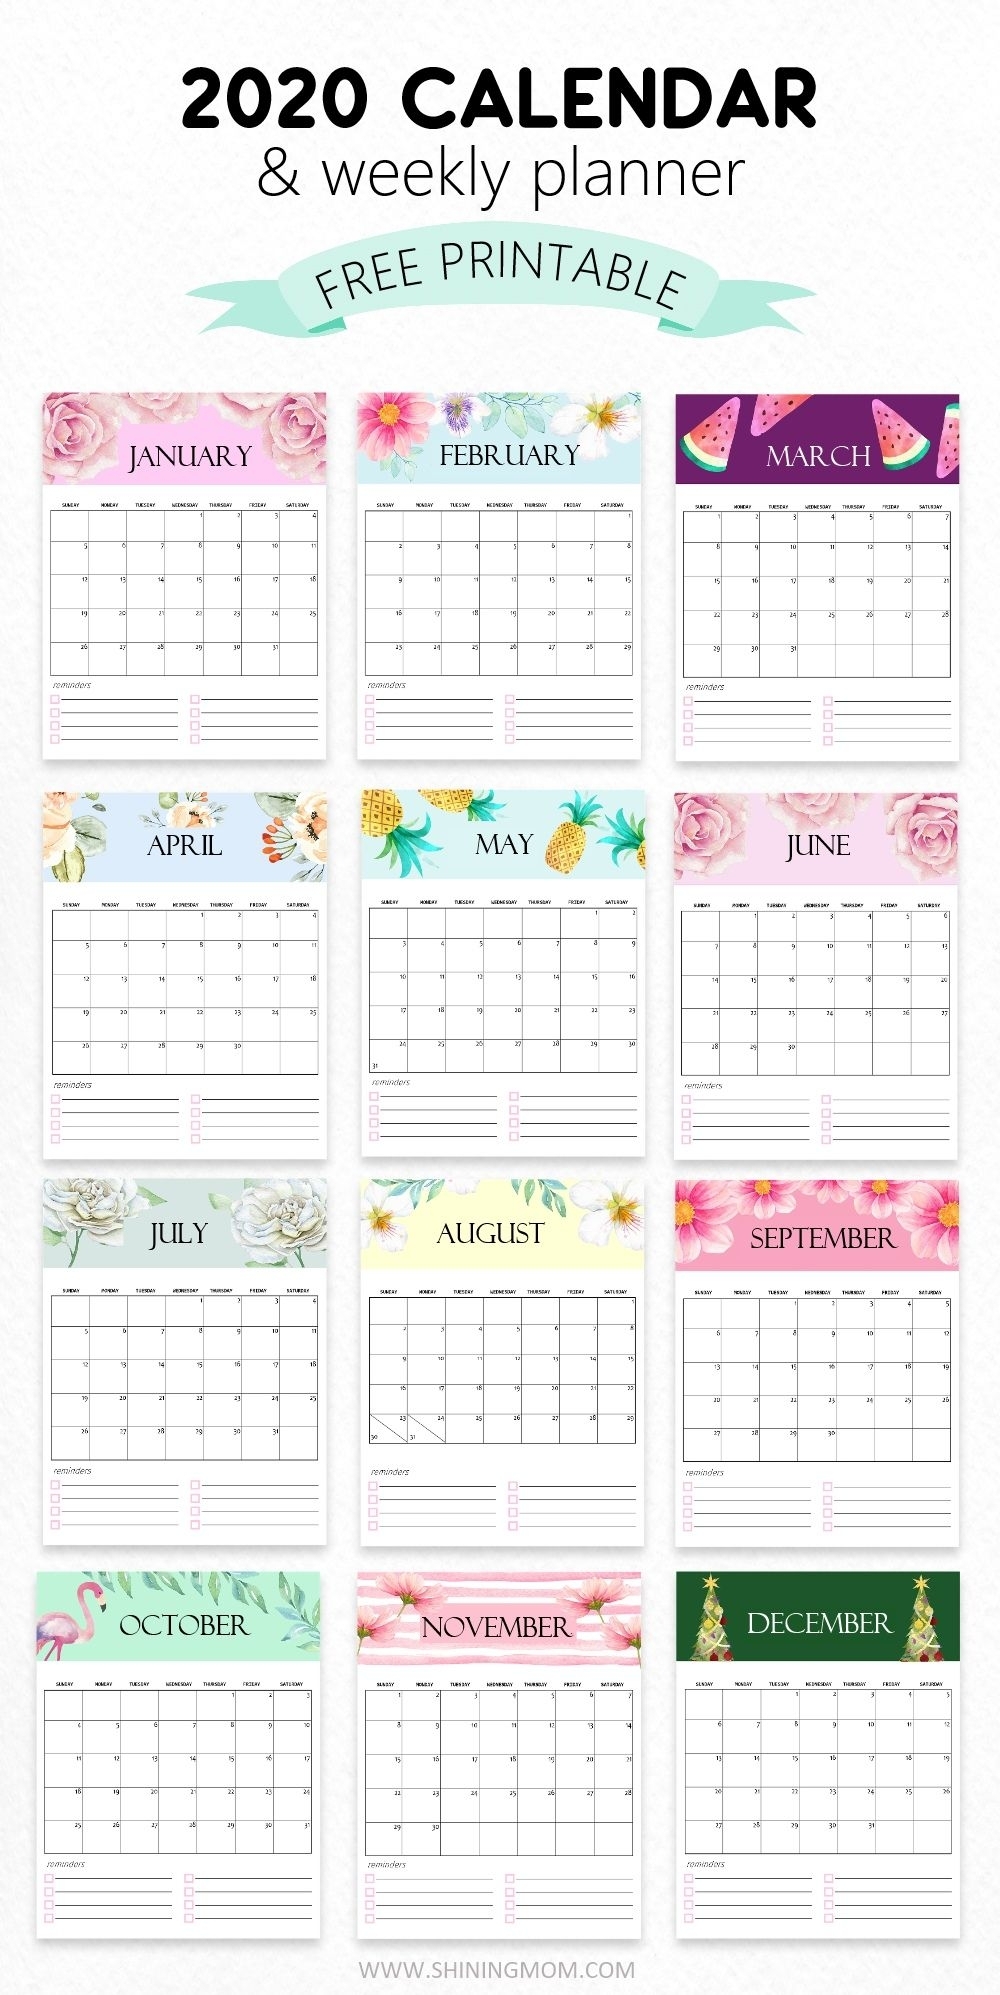 Free Calendar 2020 Printable: 12 Cute Monthly Designs To